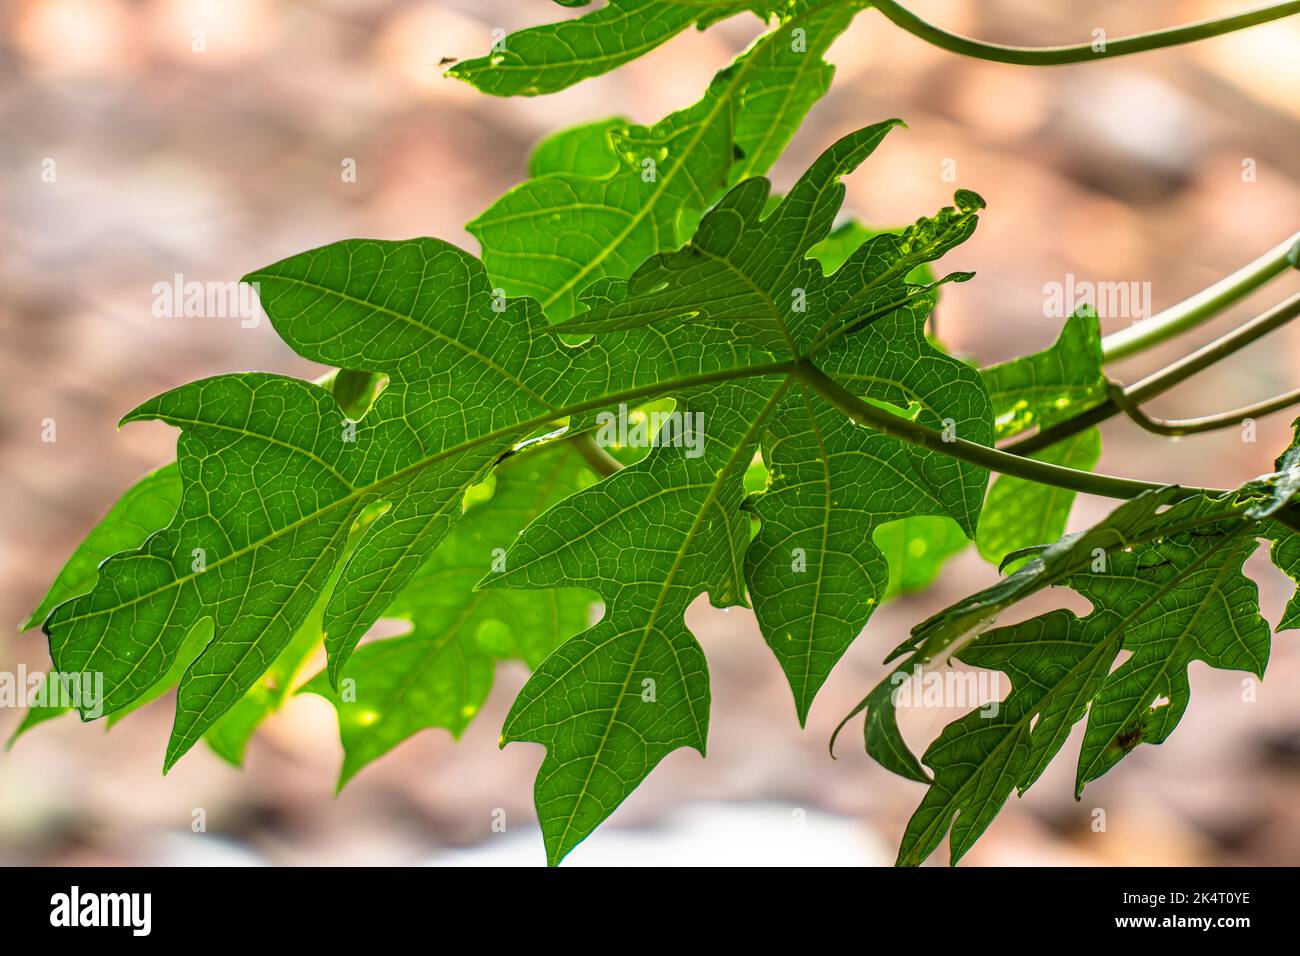 A papaya plant leaf that is uniquely shaped on a sunny morning, has a blurry brown background of other plants Stock Photo